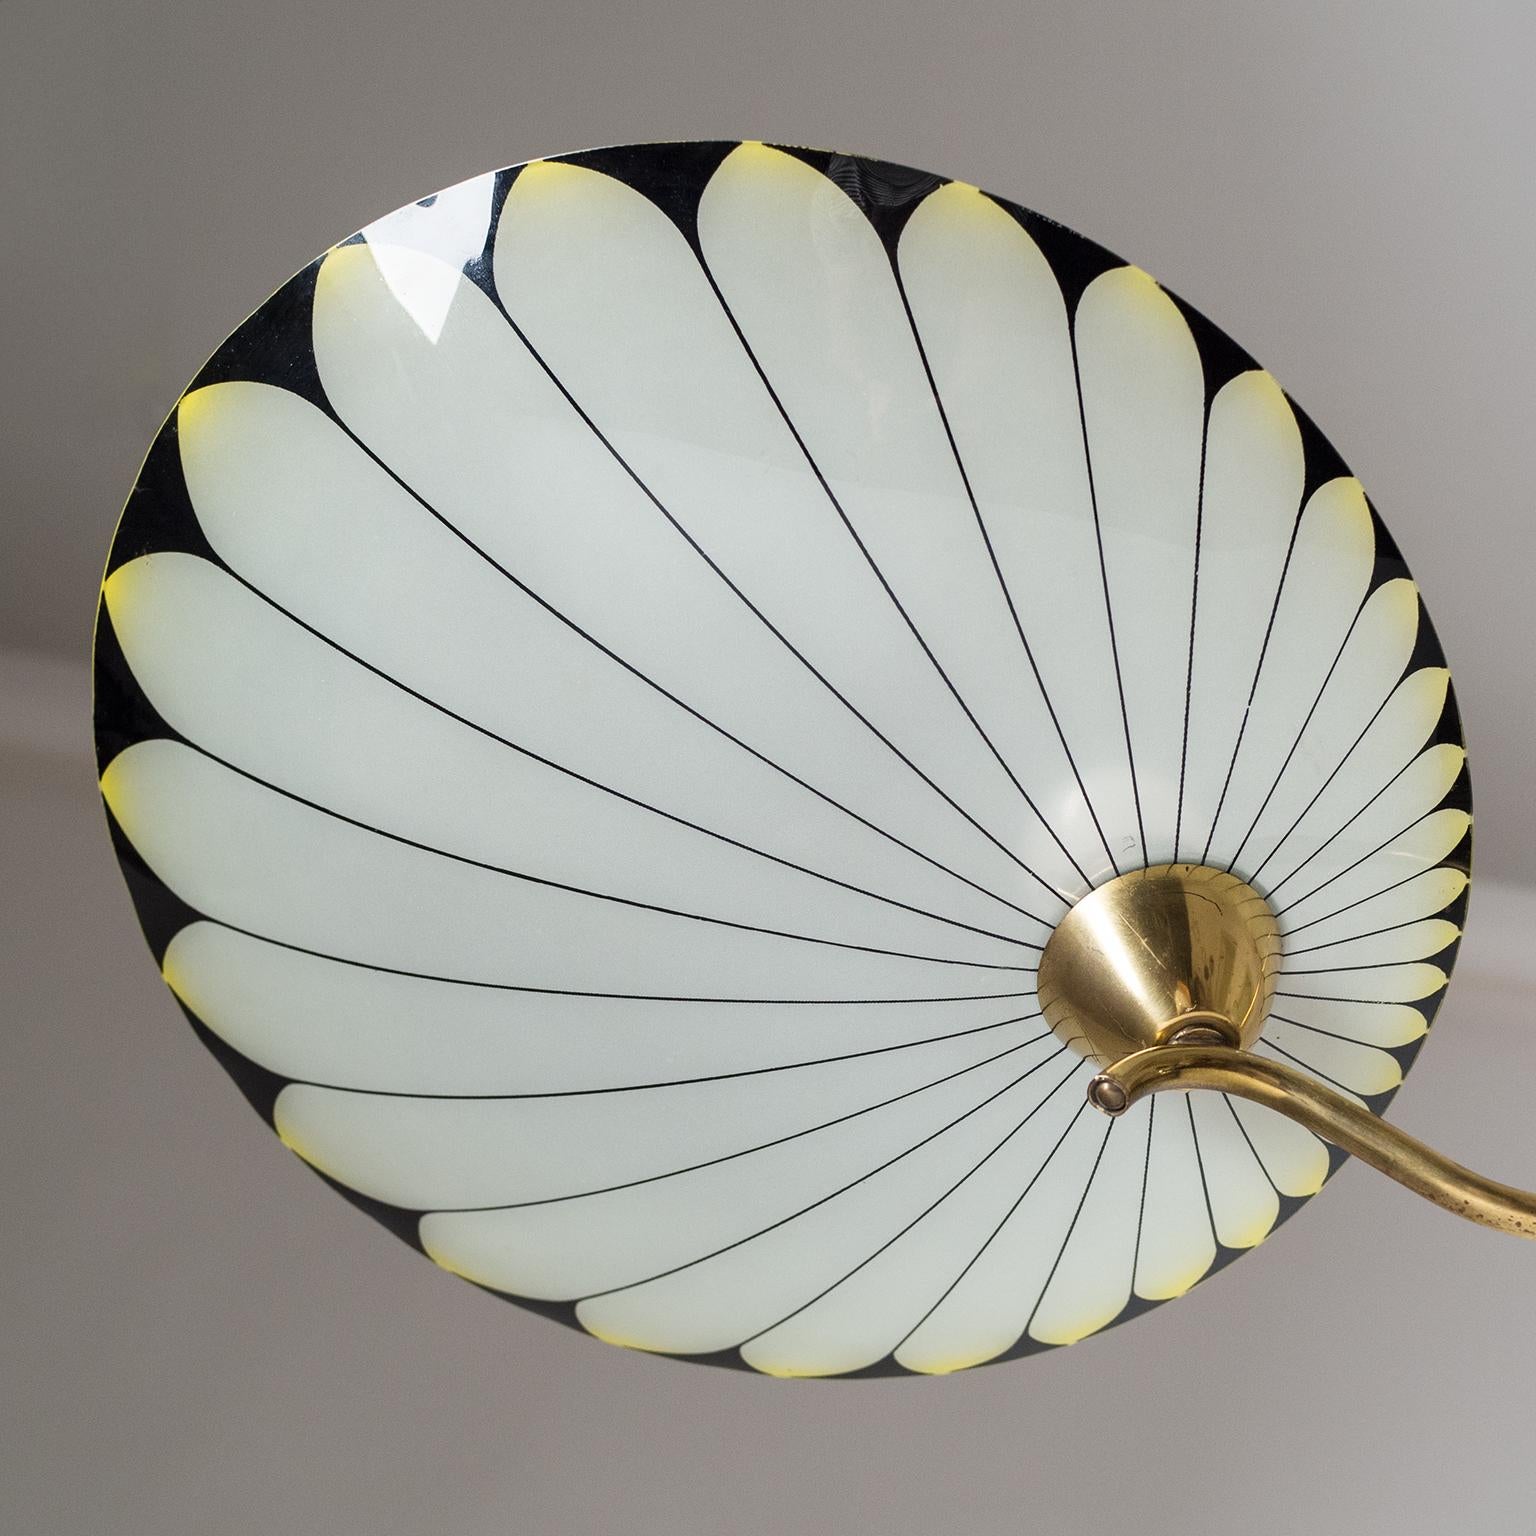 Mid-20th Century Art Deco Chandelier, 1940s, Enameled Glass and Brass